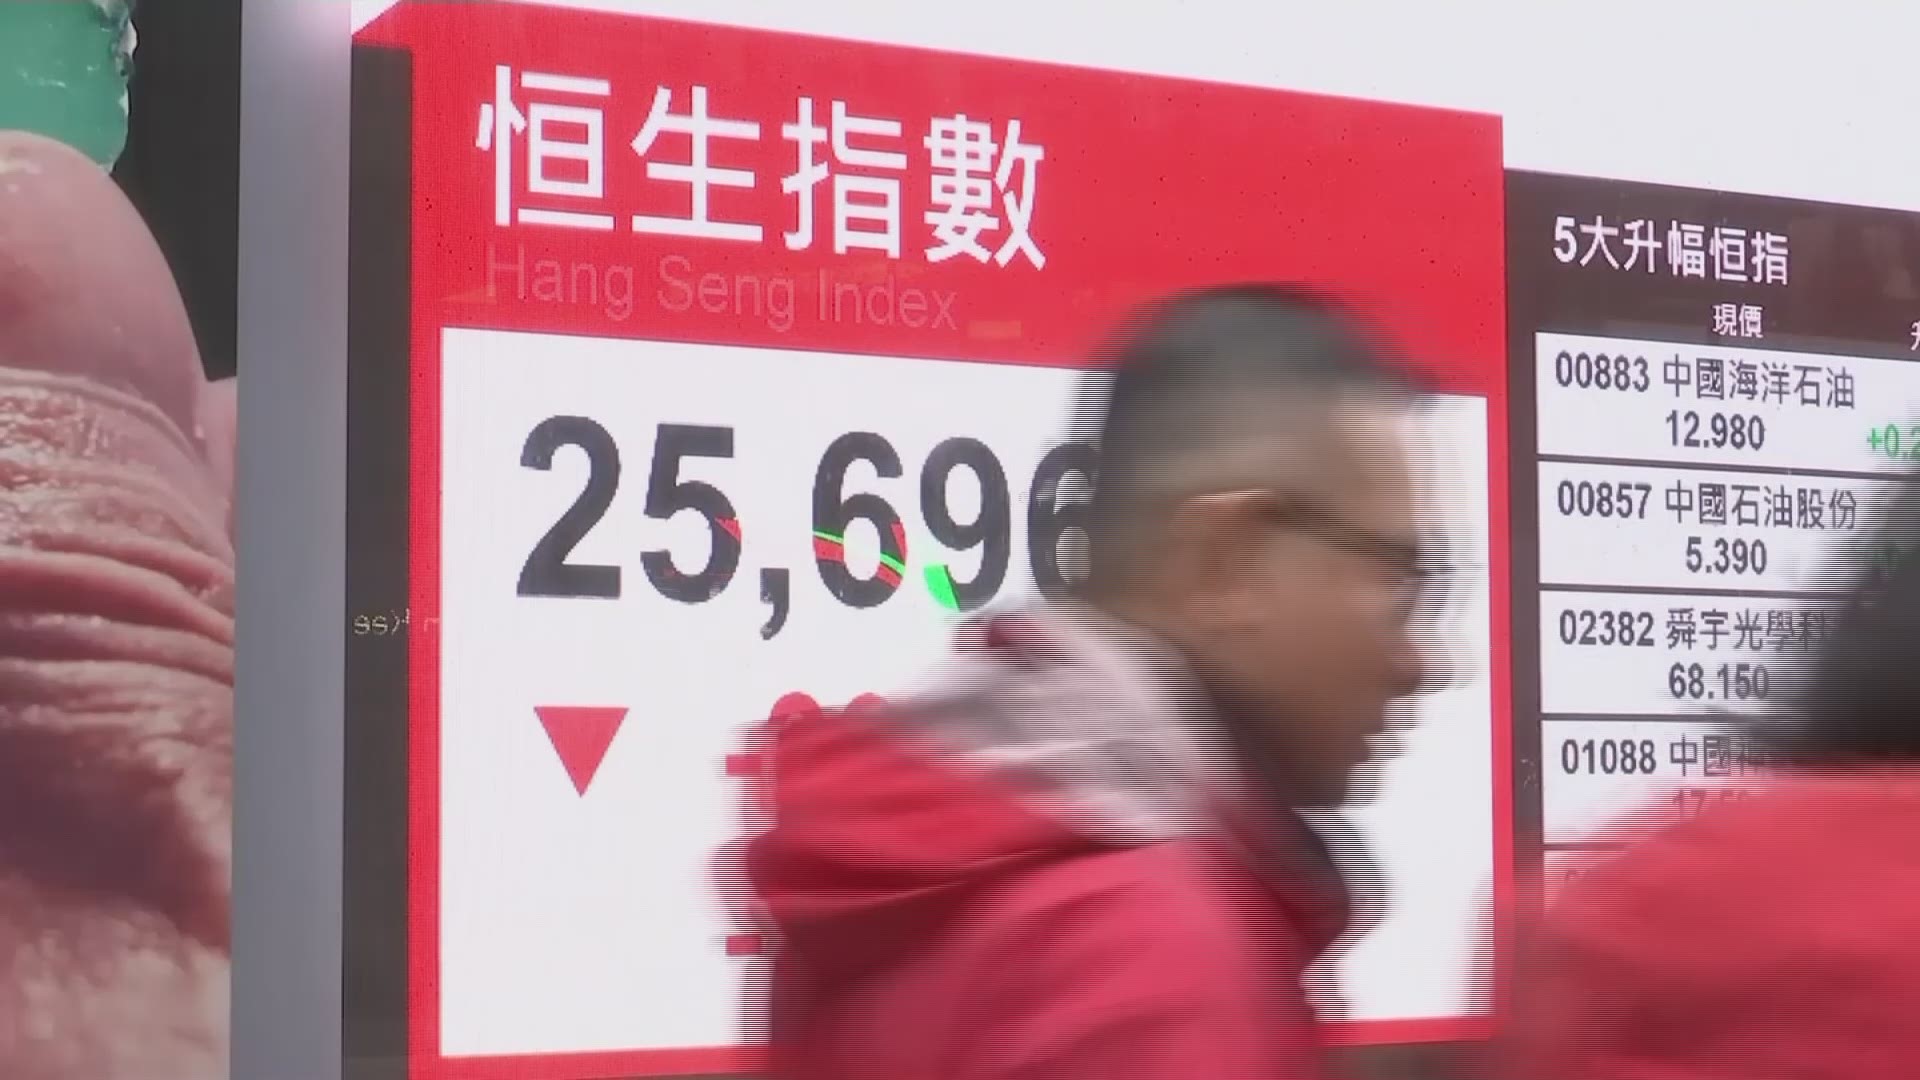 Asian markets were broadly lower on Monday after China protested the arrest of a senior executive of Chinese electronics giant Huawei, who is suspected of trying to evade US trade curbs on Iran.